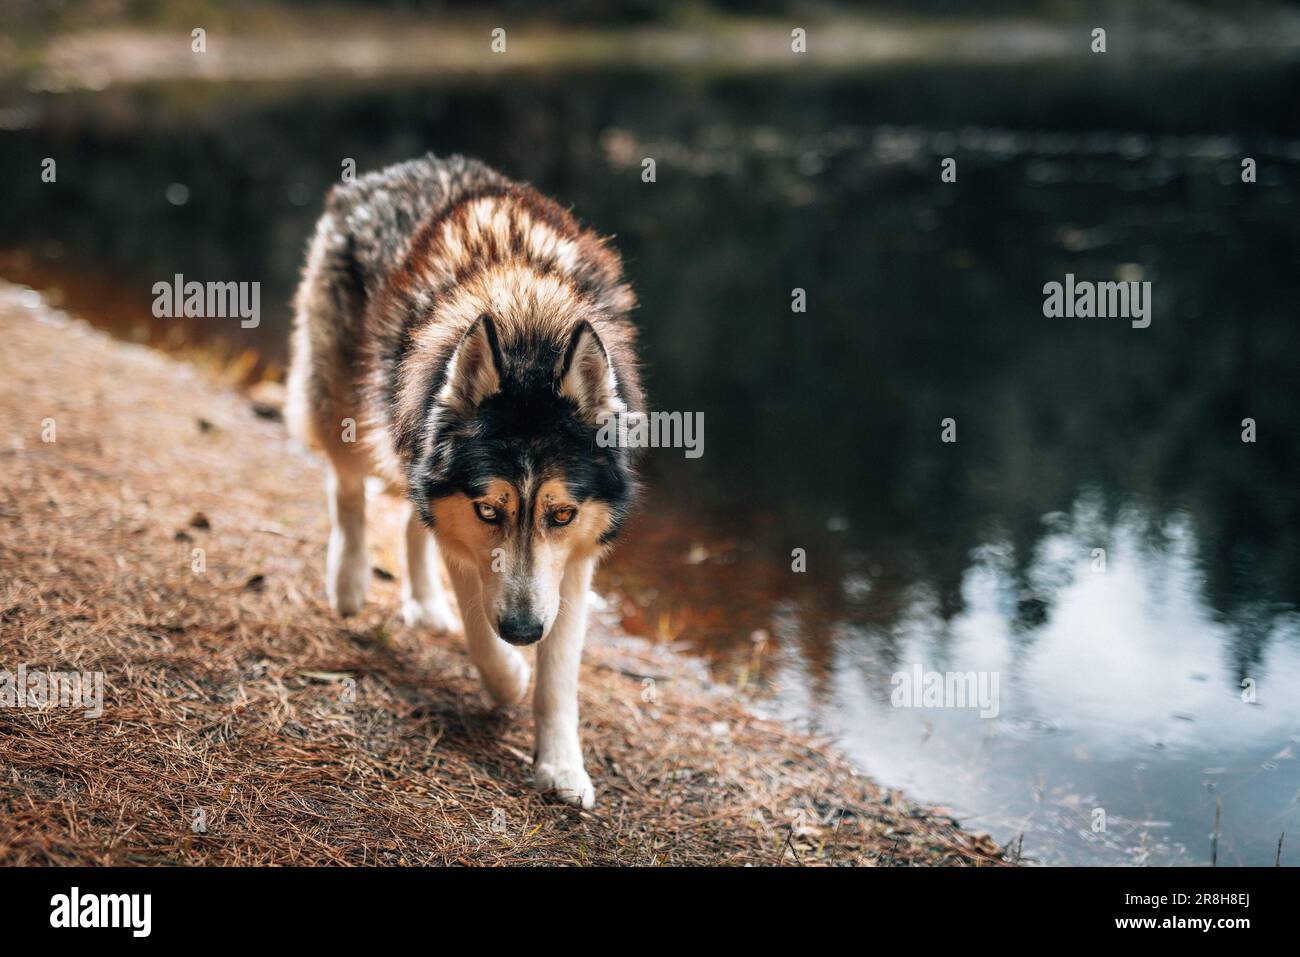 A Mackenzie River husky walking around next to a pond in a wooded area Stock Photo